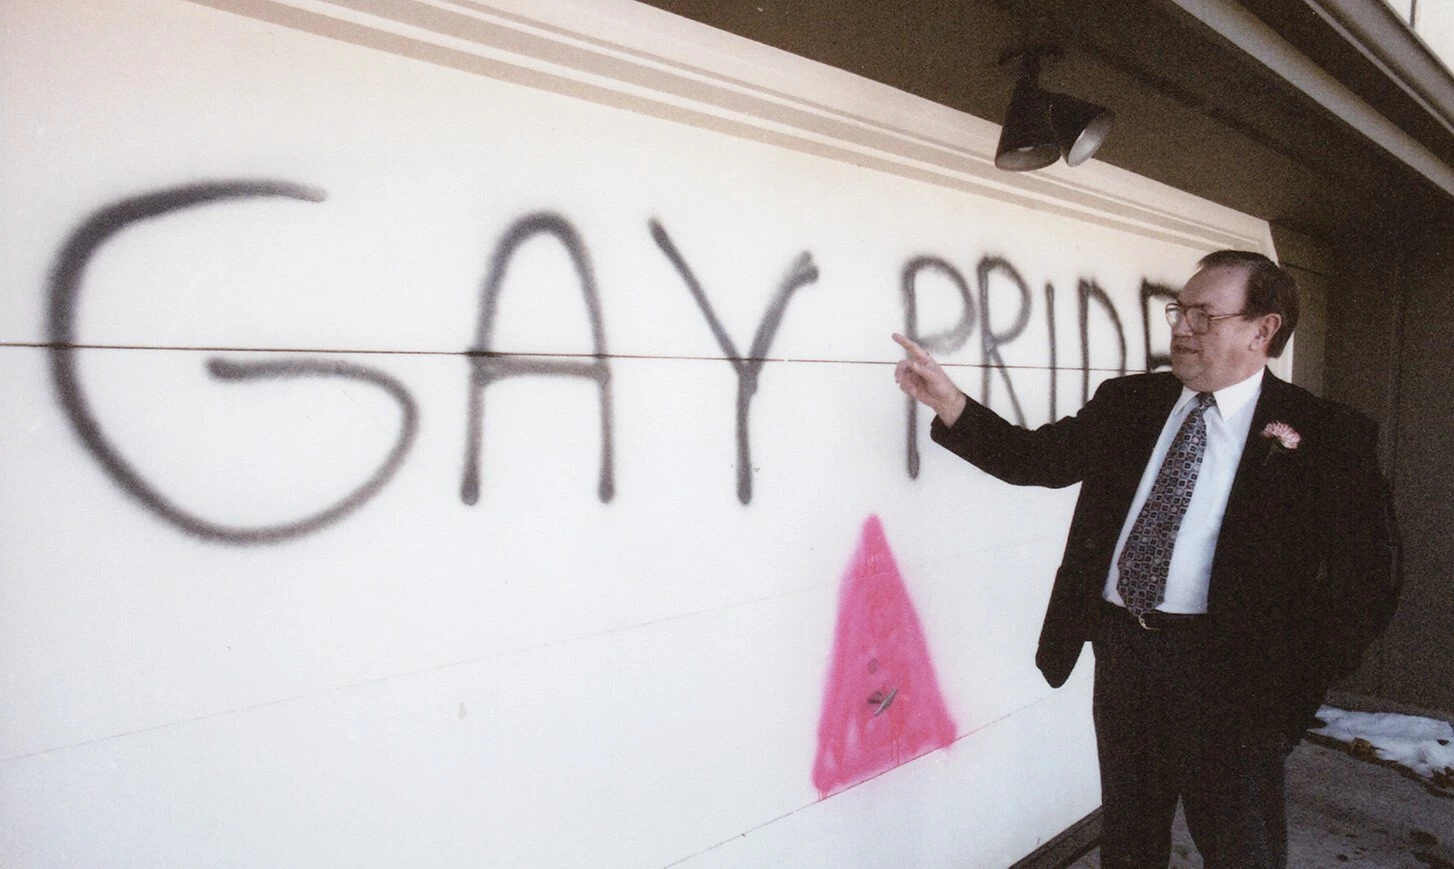 White man in a suit and tie pointing at spray paint on a white garage door.